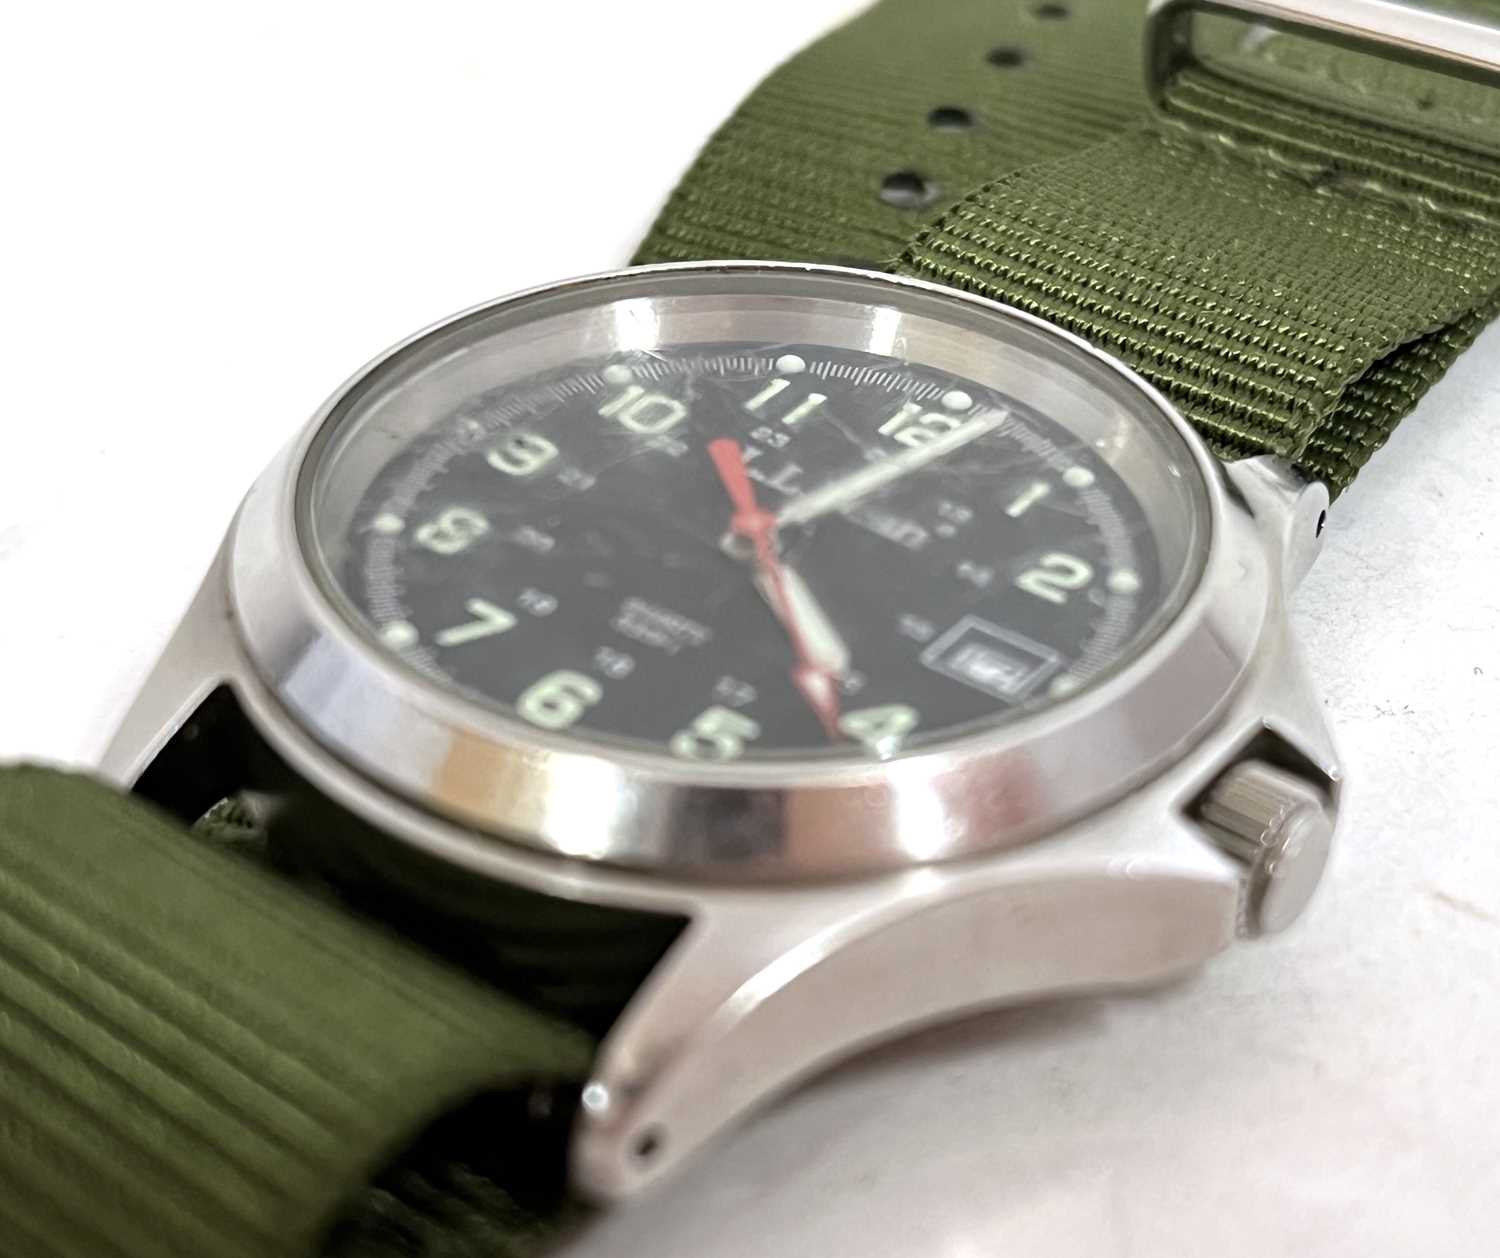 A L L Bean military style gents Quartz wristwatch, the watch has a stainless steel case and Quartz